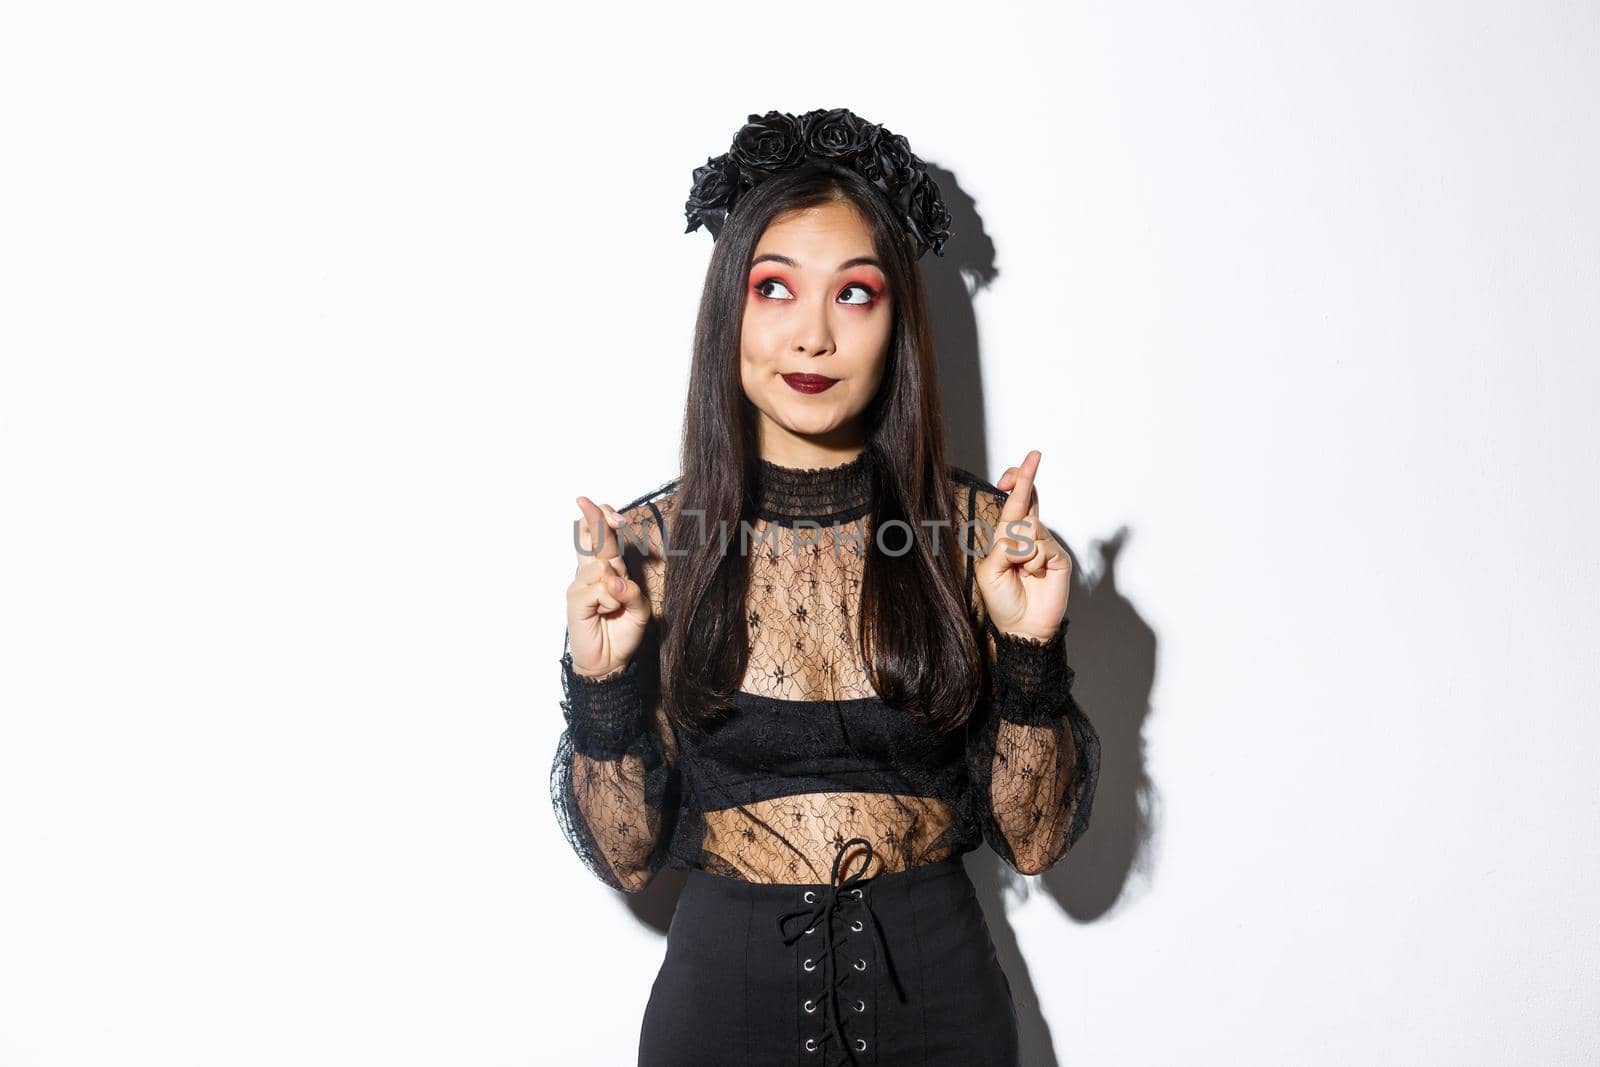 Hopeful cute asian woman in gothic lace dress and black wreath, looking upper left corner and cross fingers for good luck, making wish or praying, standing over white background.